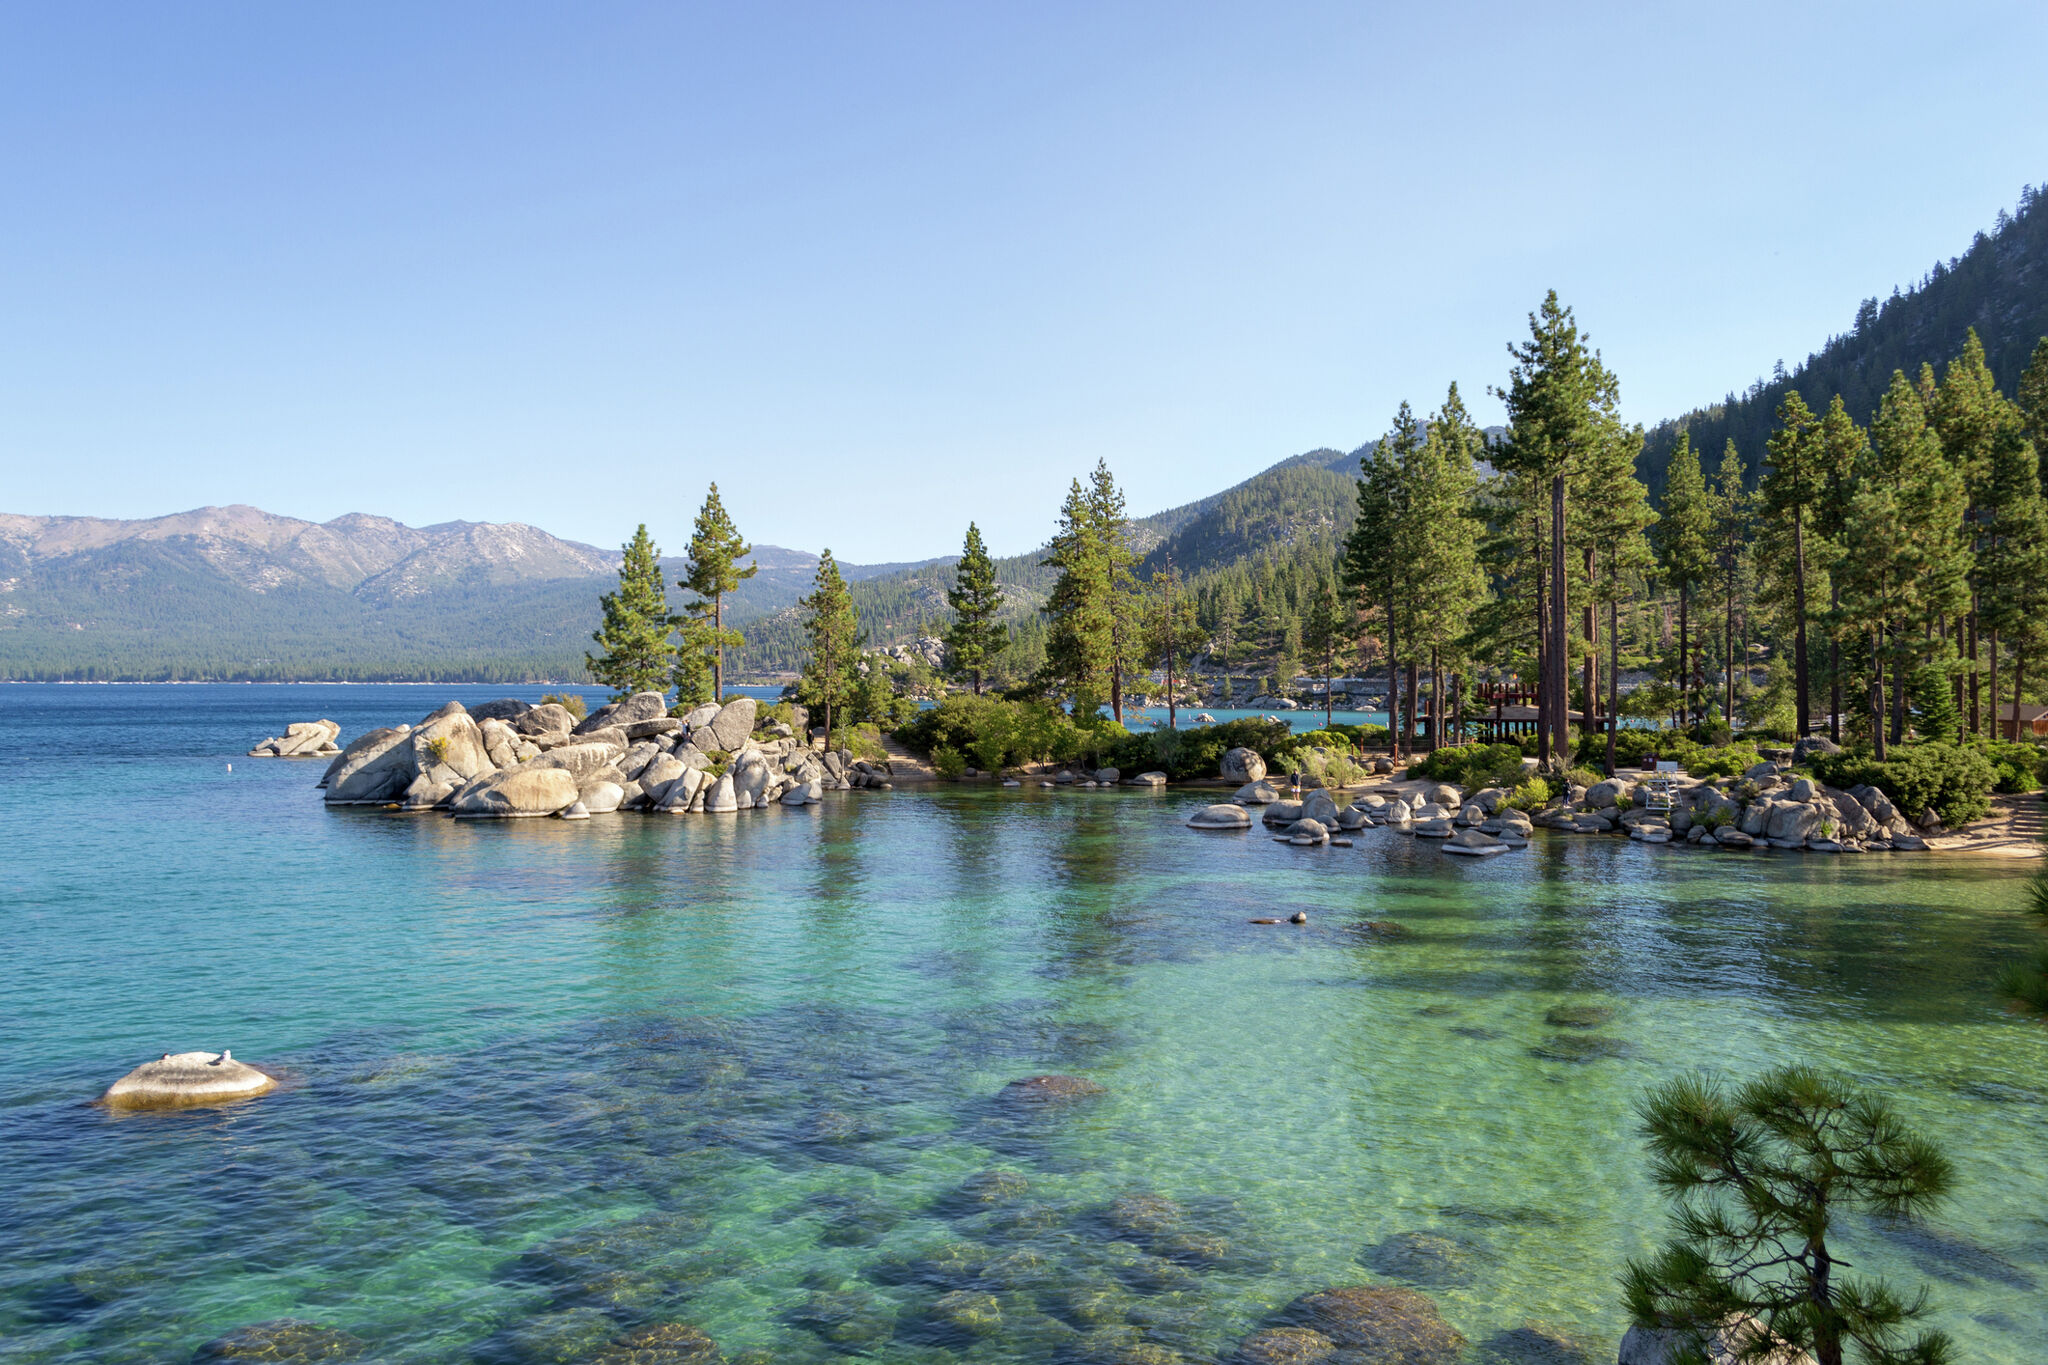 Invasive species could ruin Lake Tahoe and cost the region billions